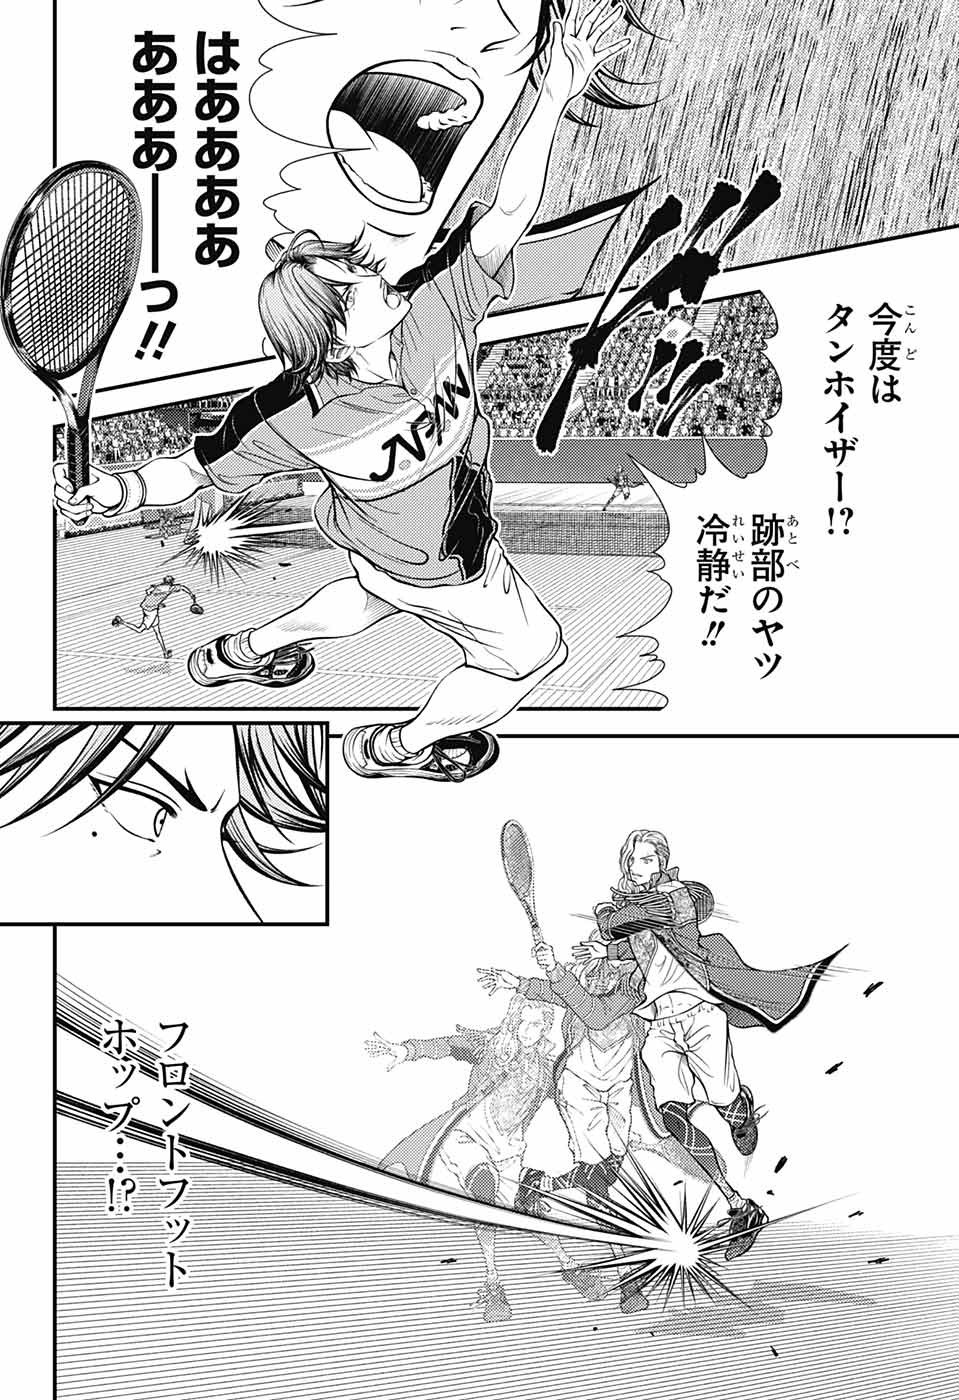 Shin Prince of Tennis - Chapter 390 - Page 6